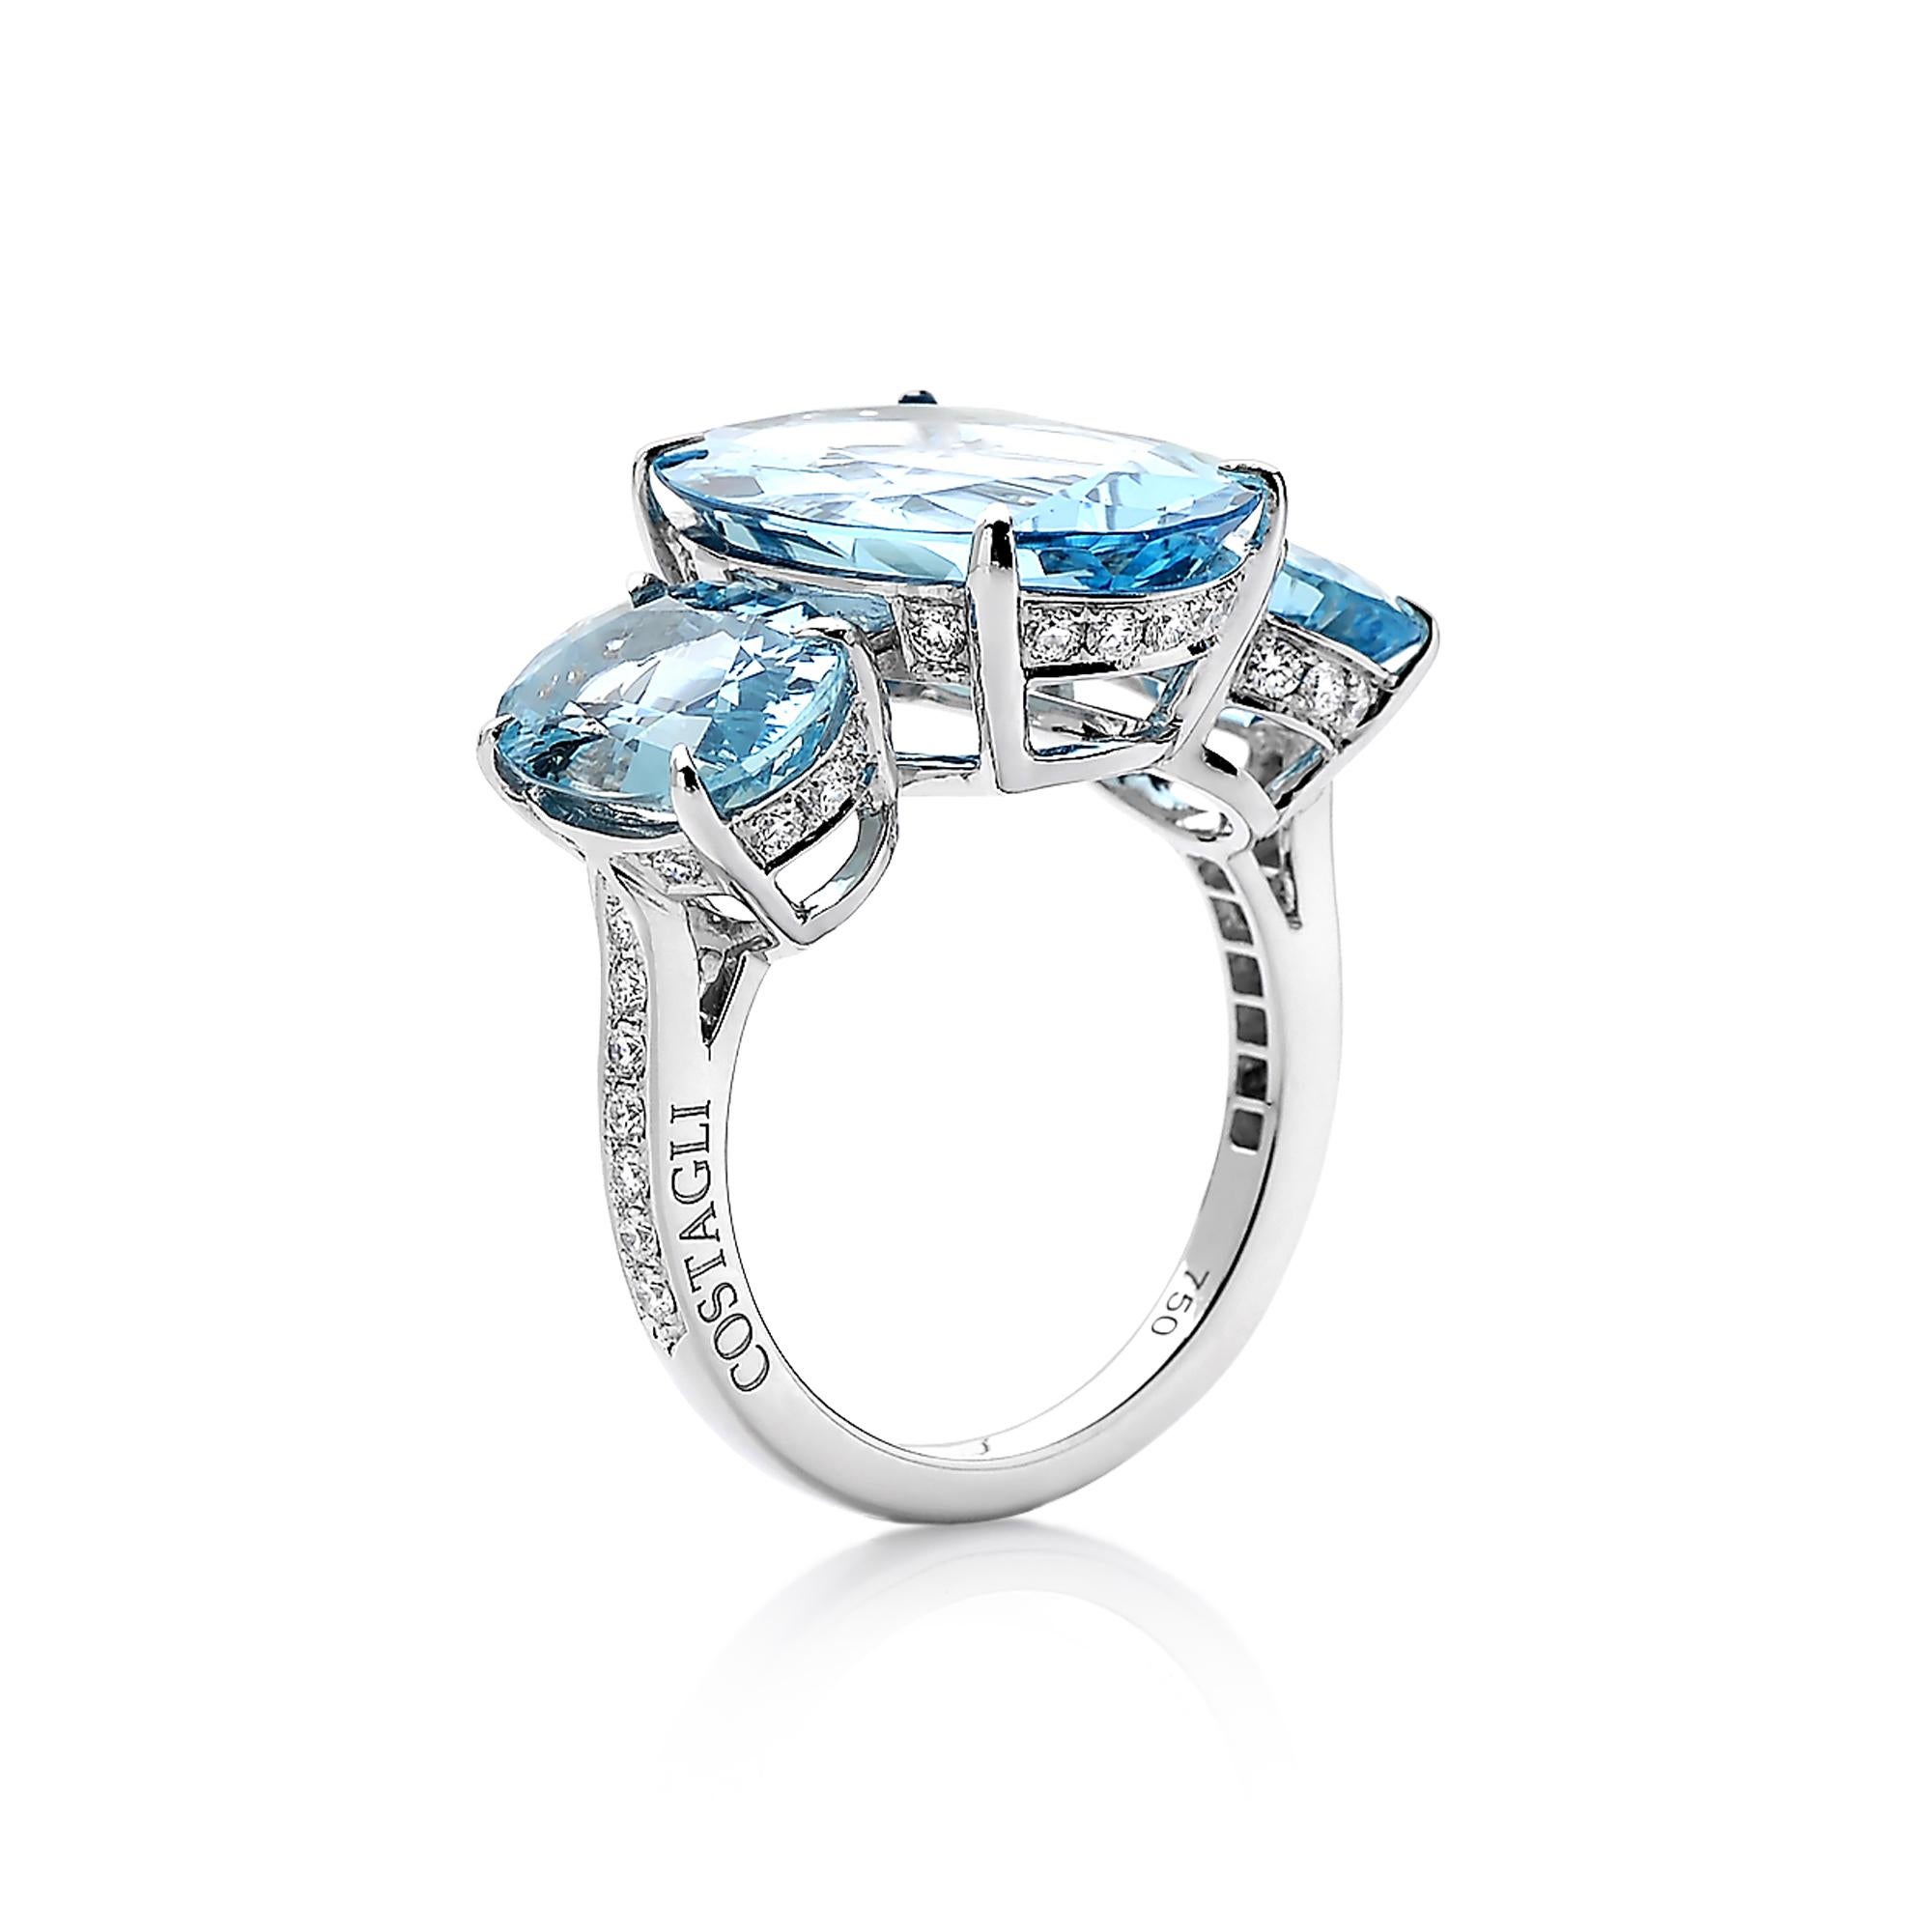 One of a kind oval-shaped aquamarine three stone ring set in 18k white gold with pave-set round, brilliant diamond detailing.

A classic ring silhouette paired with the unique oval cut of the aquamarines makes this jewel truly feel timeless with a